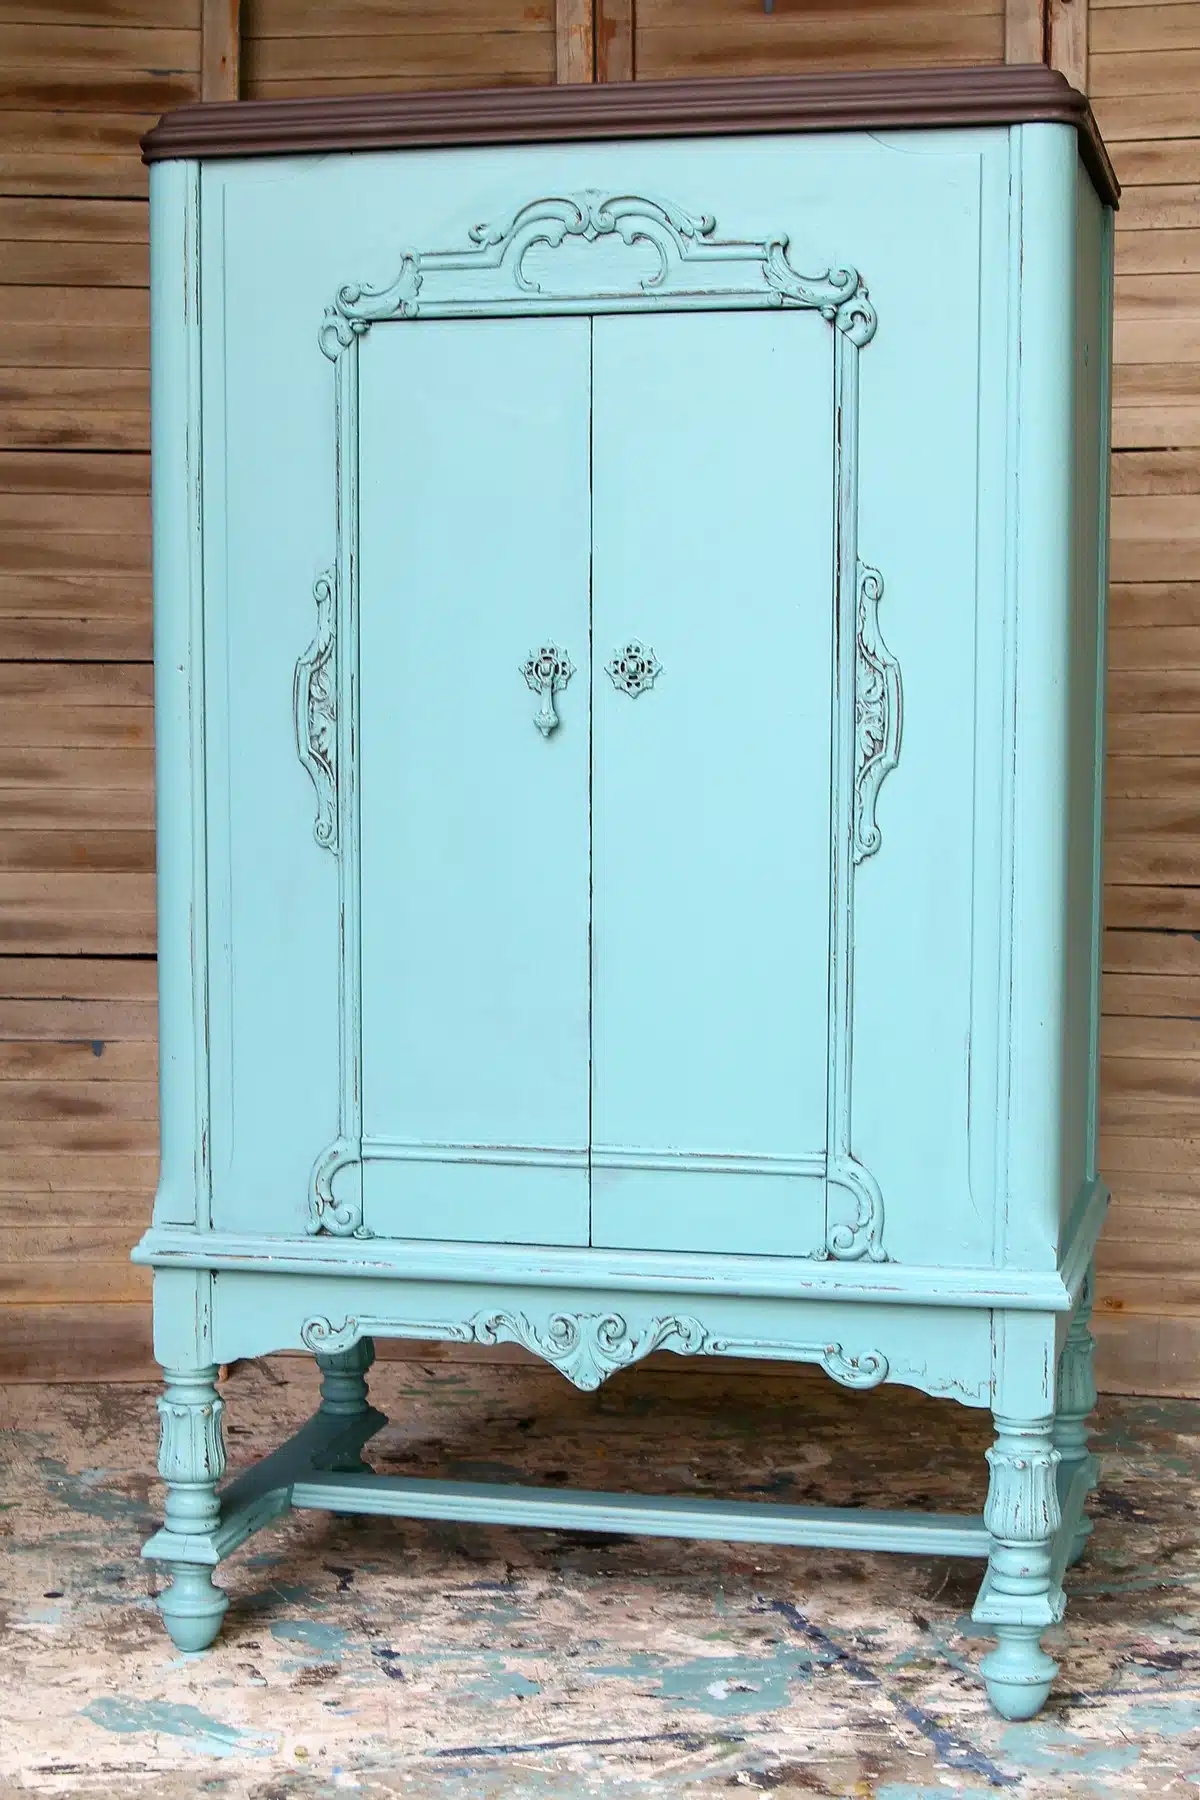 How to paint a vintage radio cabinet with latex paint